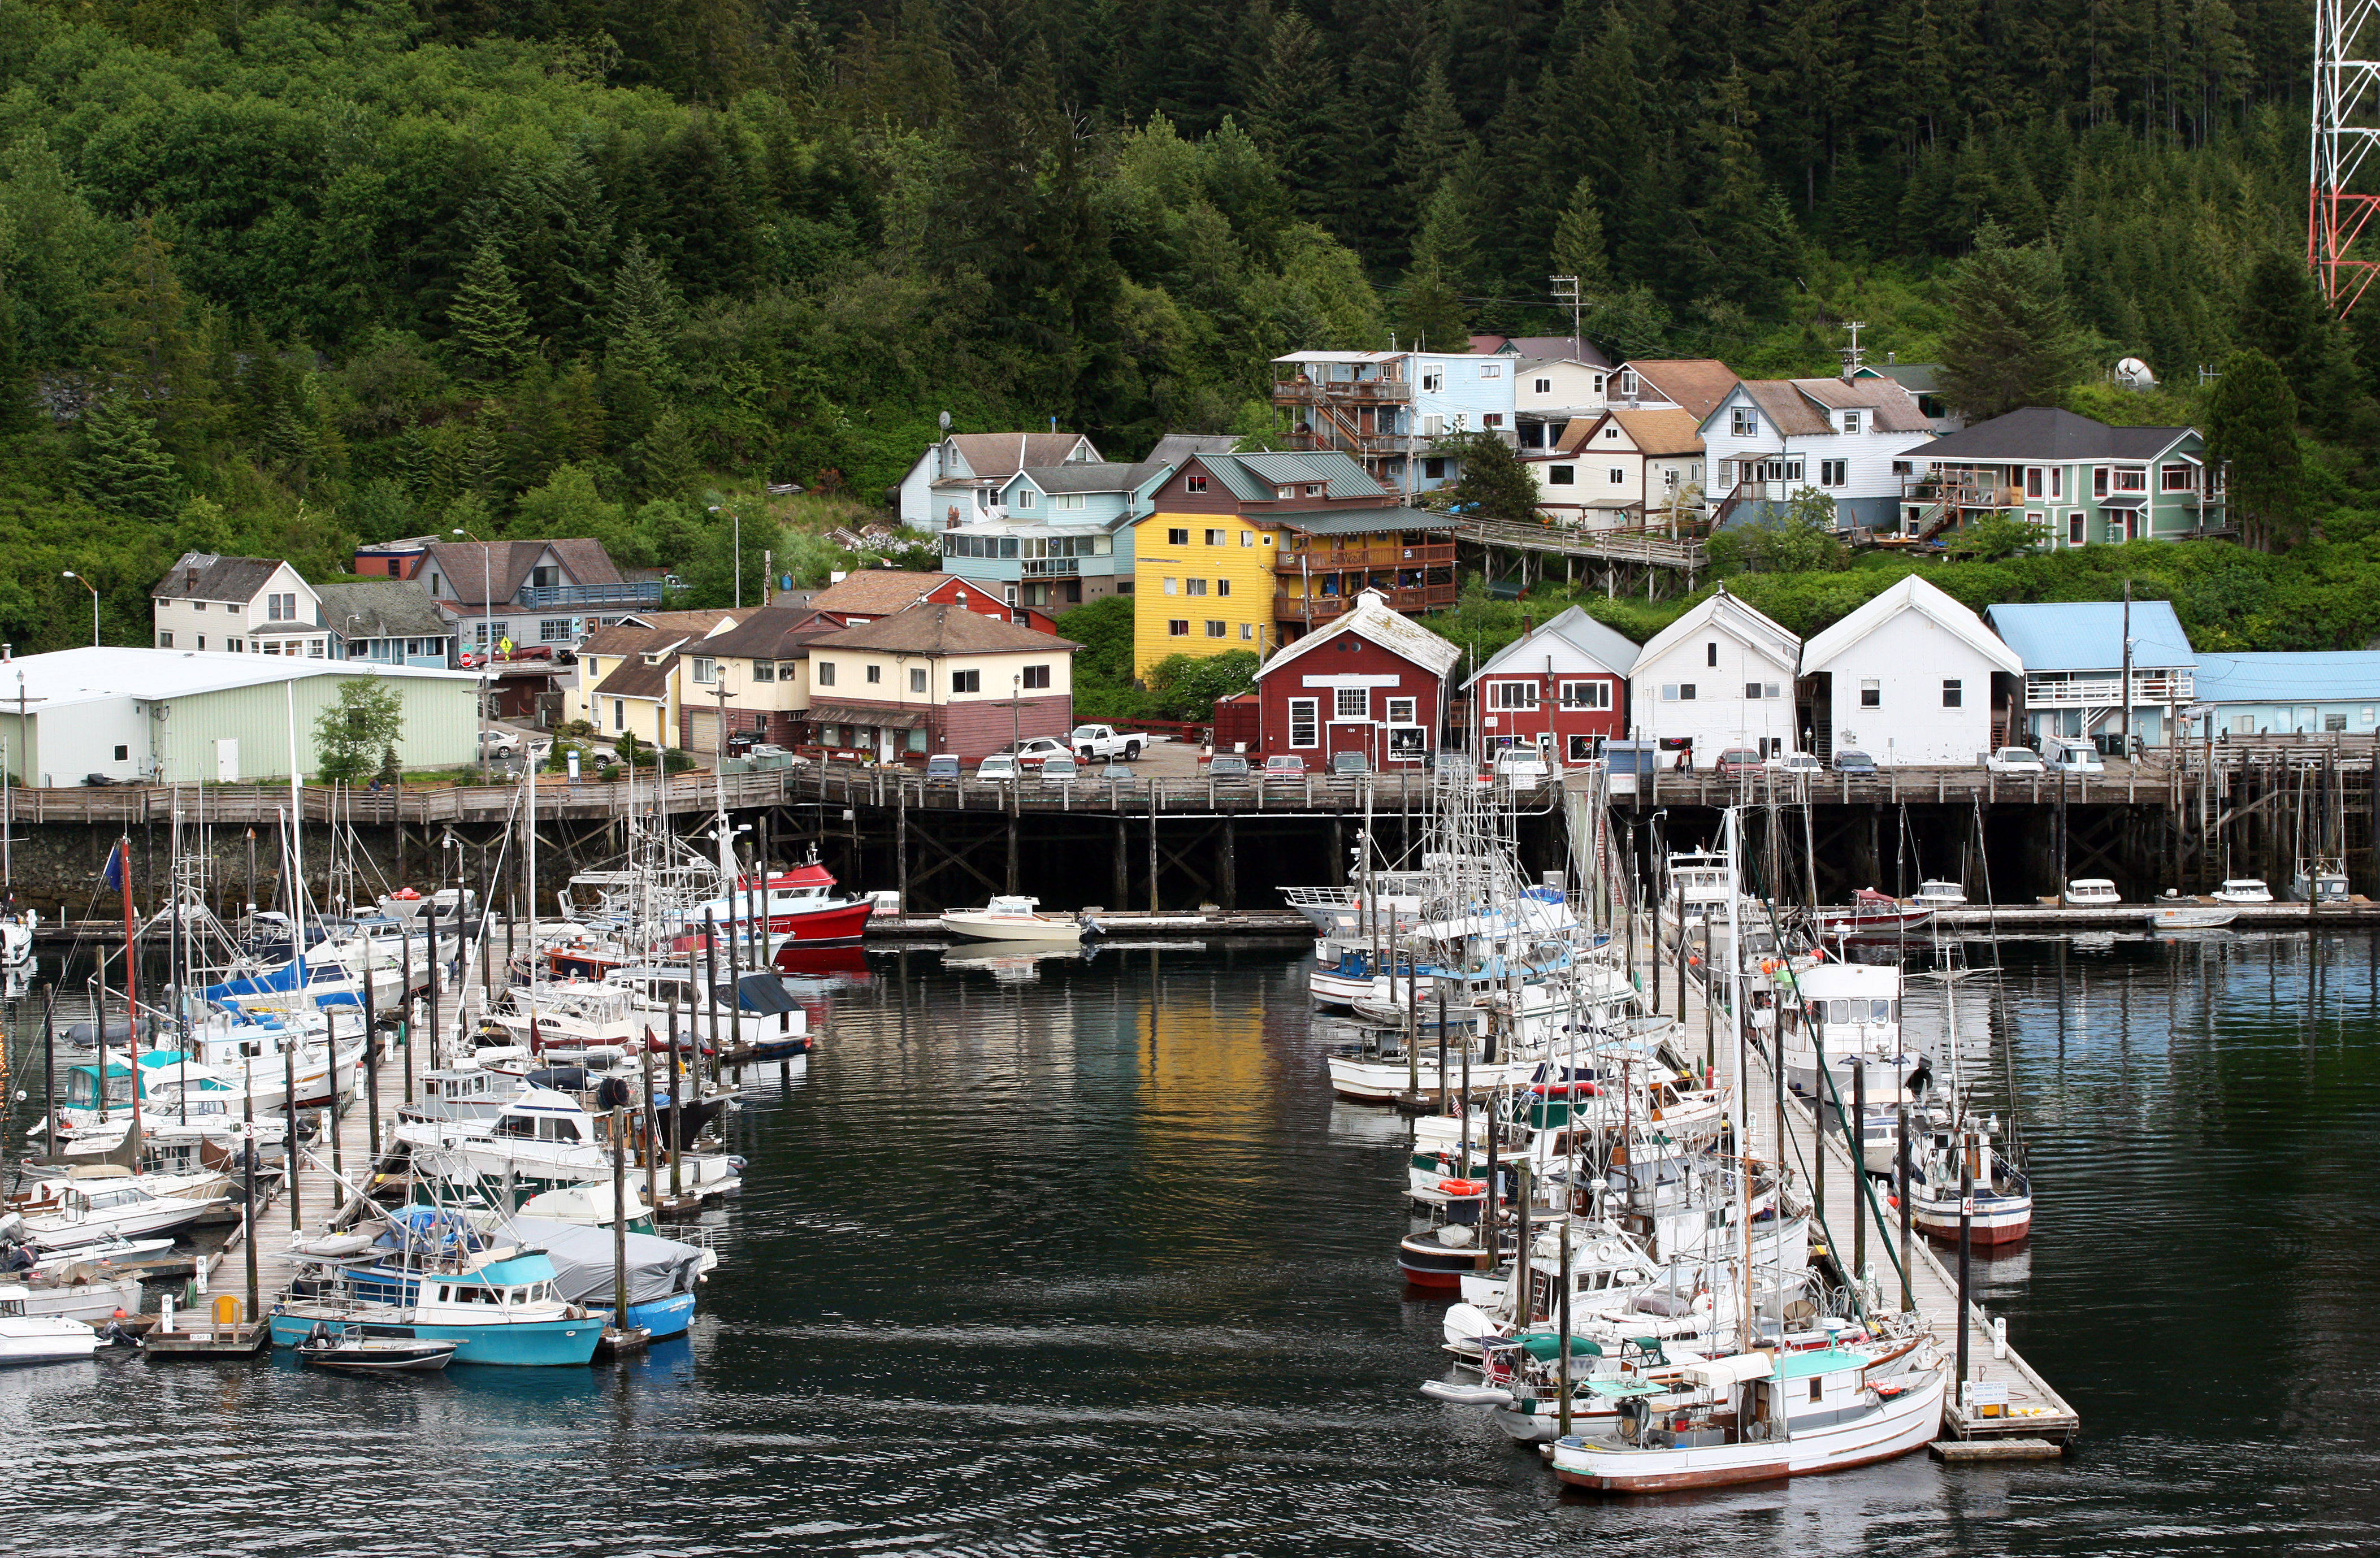 Alaska from the waterfront. | Source: Shutterstock